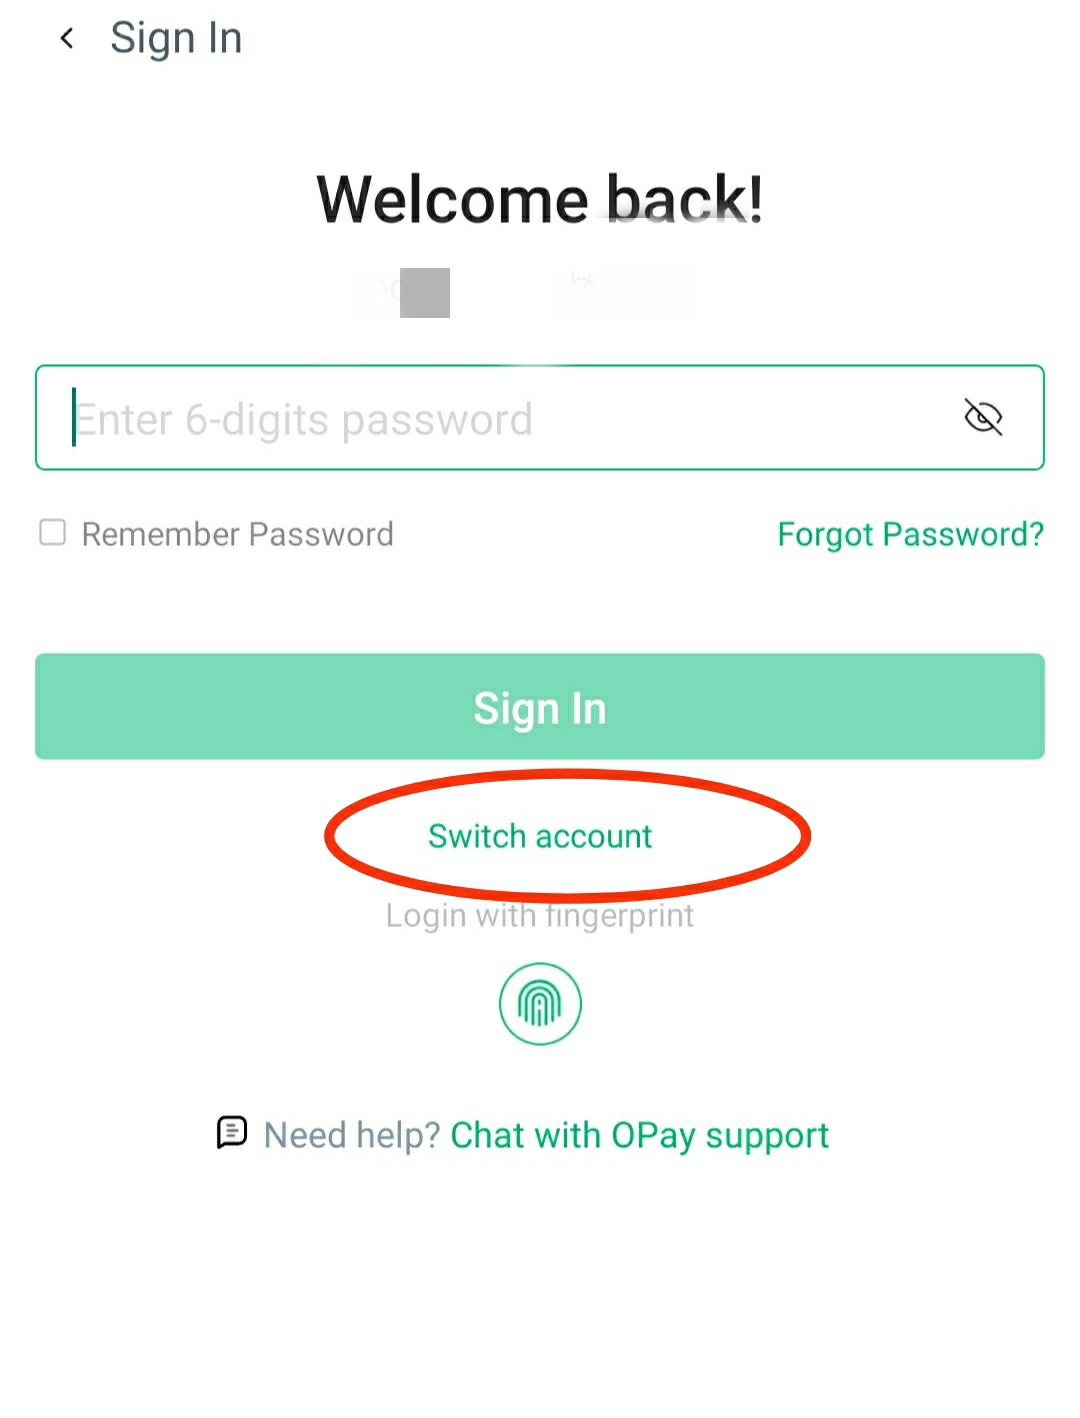 Opay app login page before switching accounts